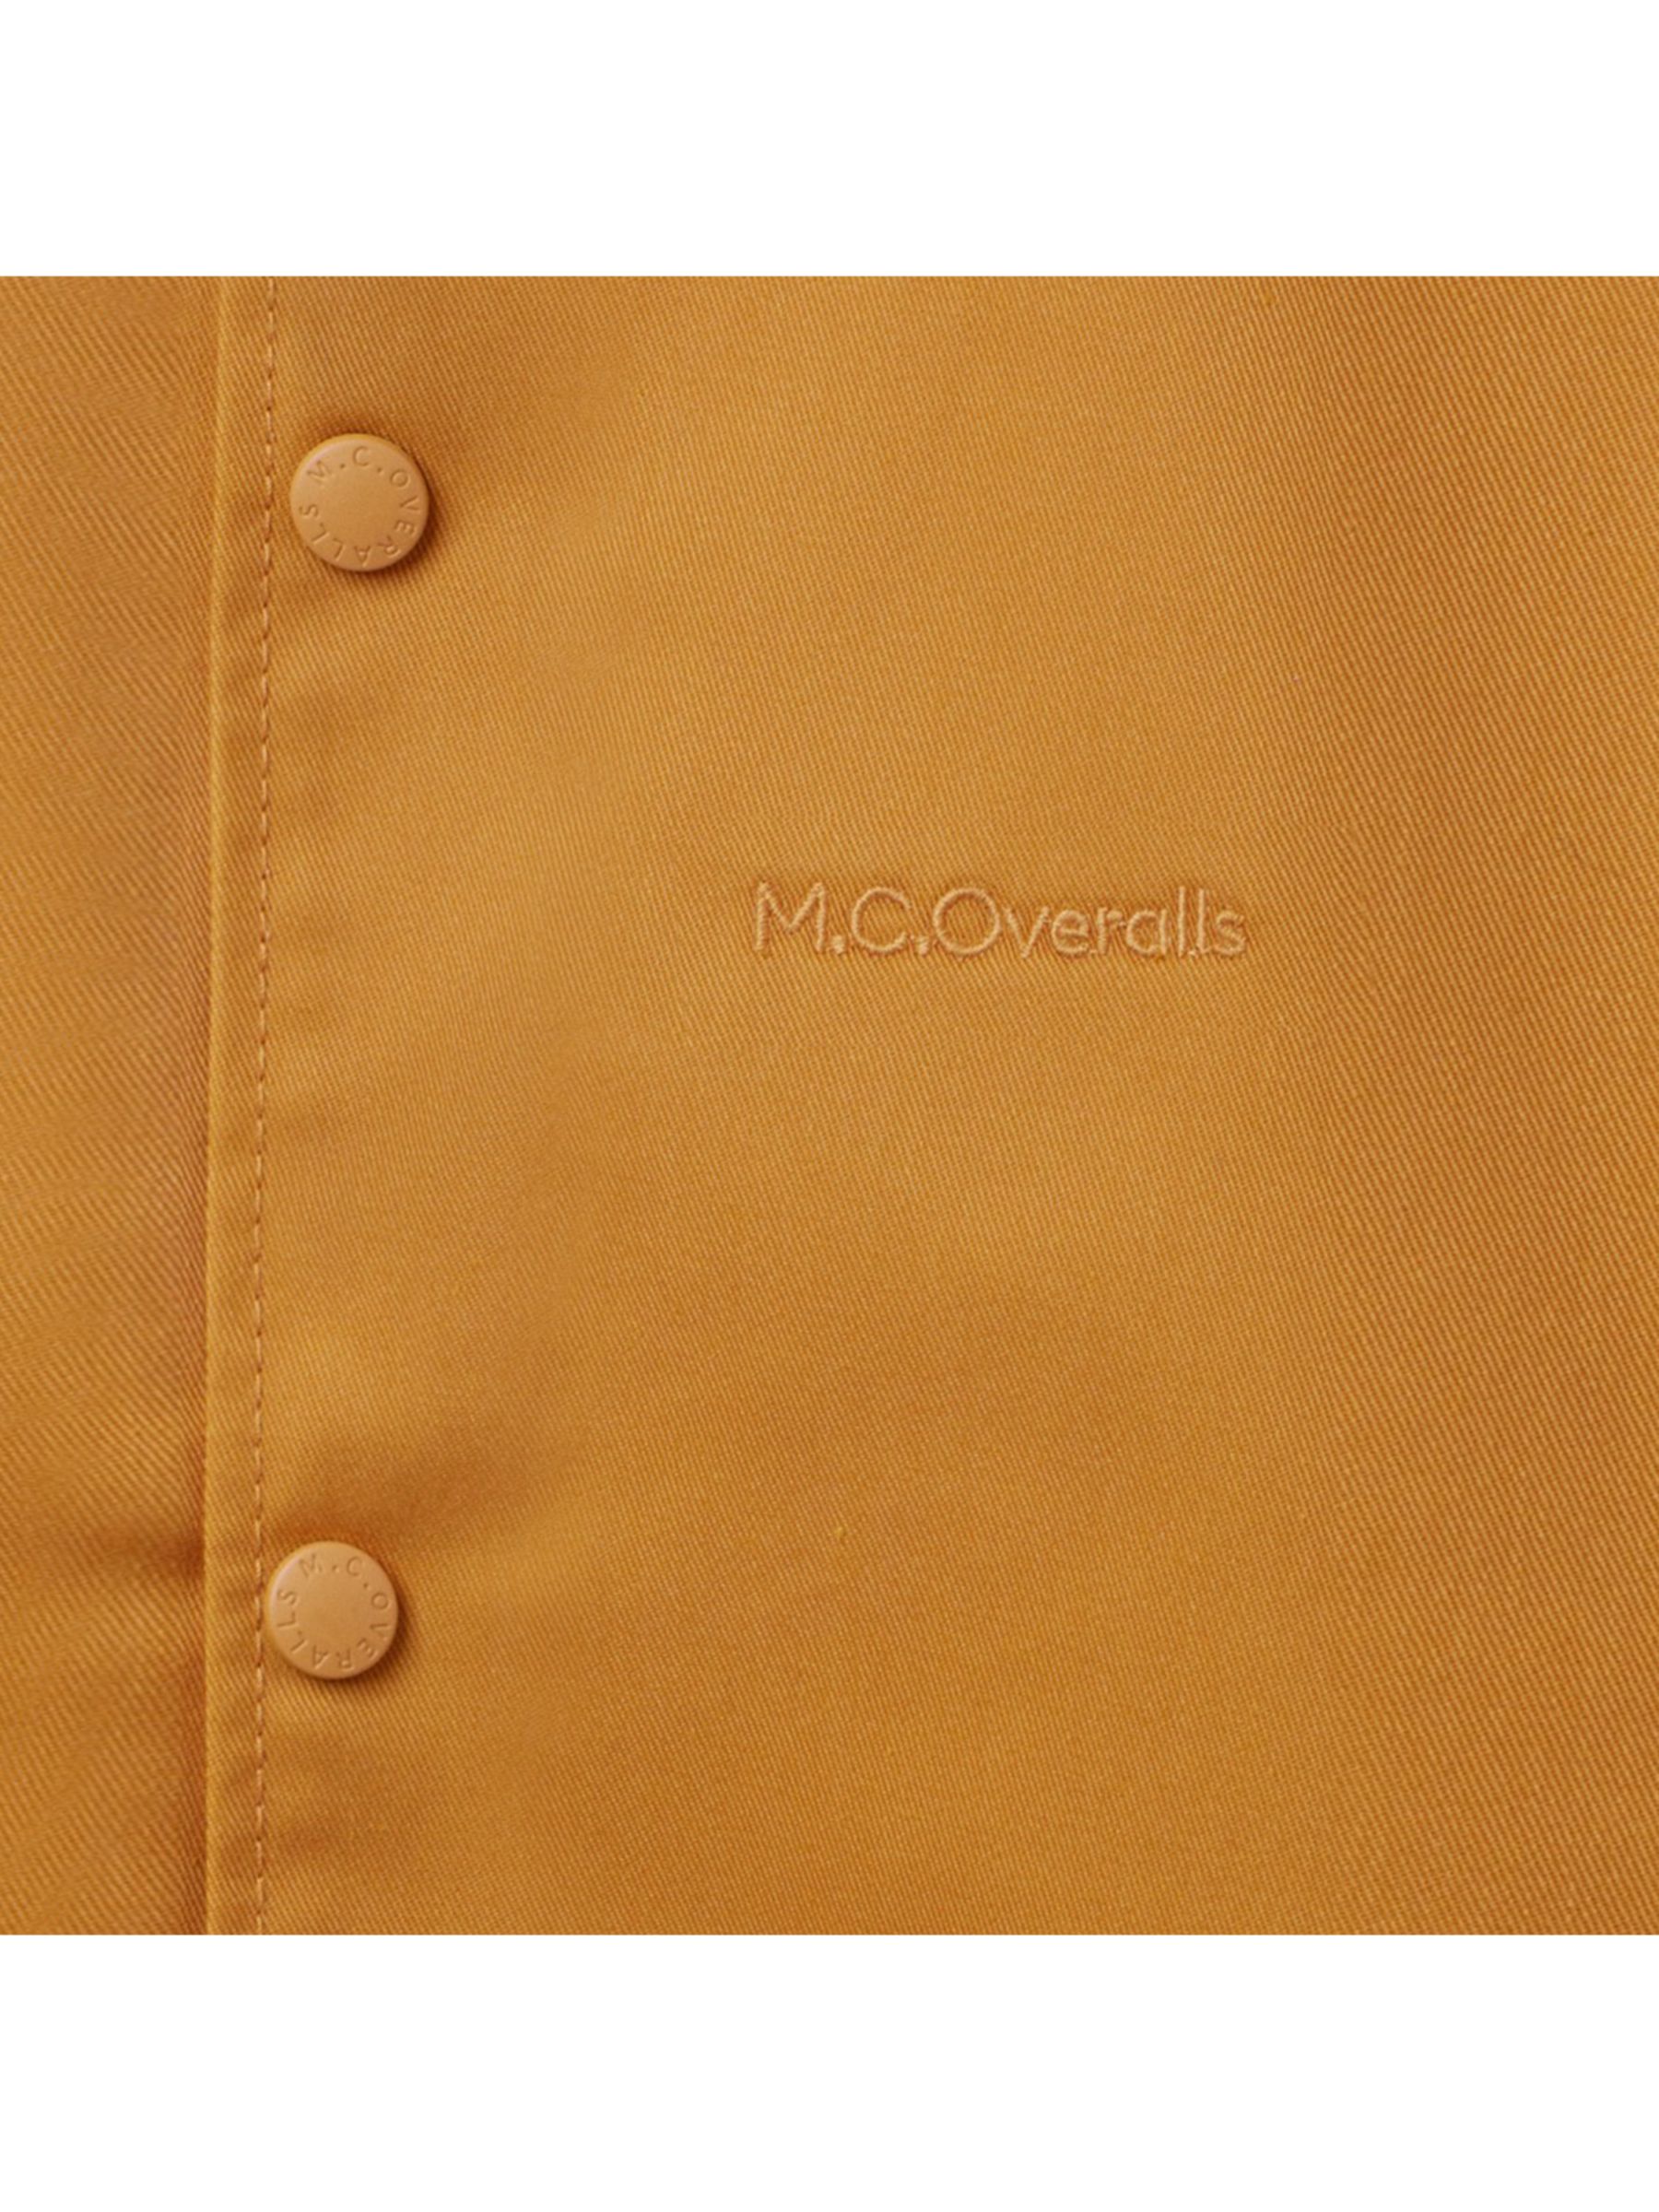 M.C.Overalls Fitted Coach Jacket, Mustard Yellow, S